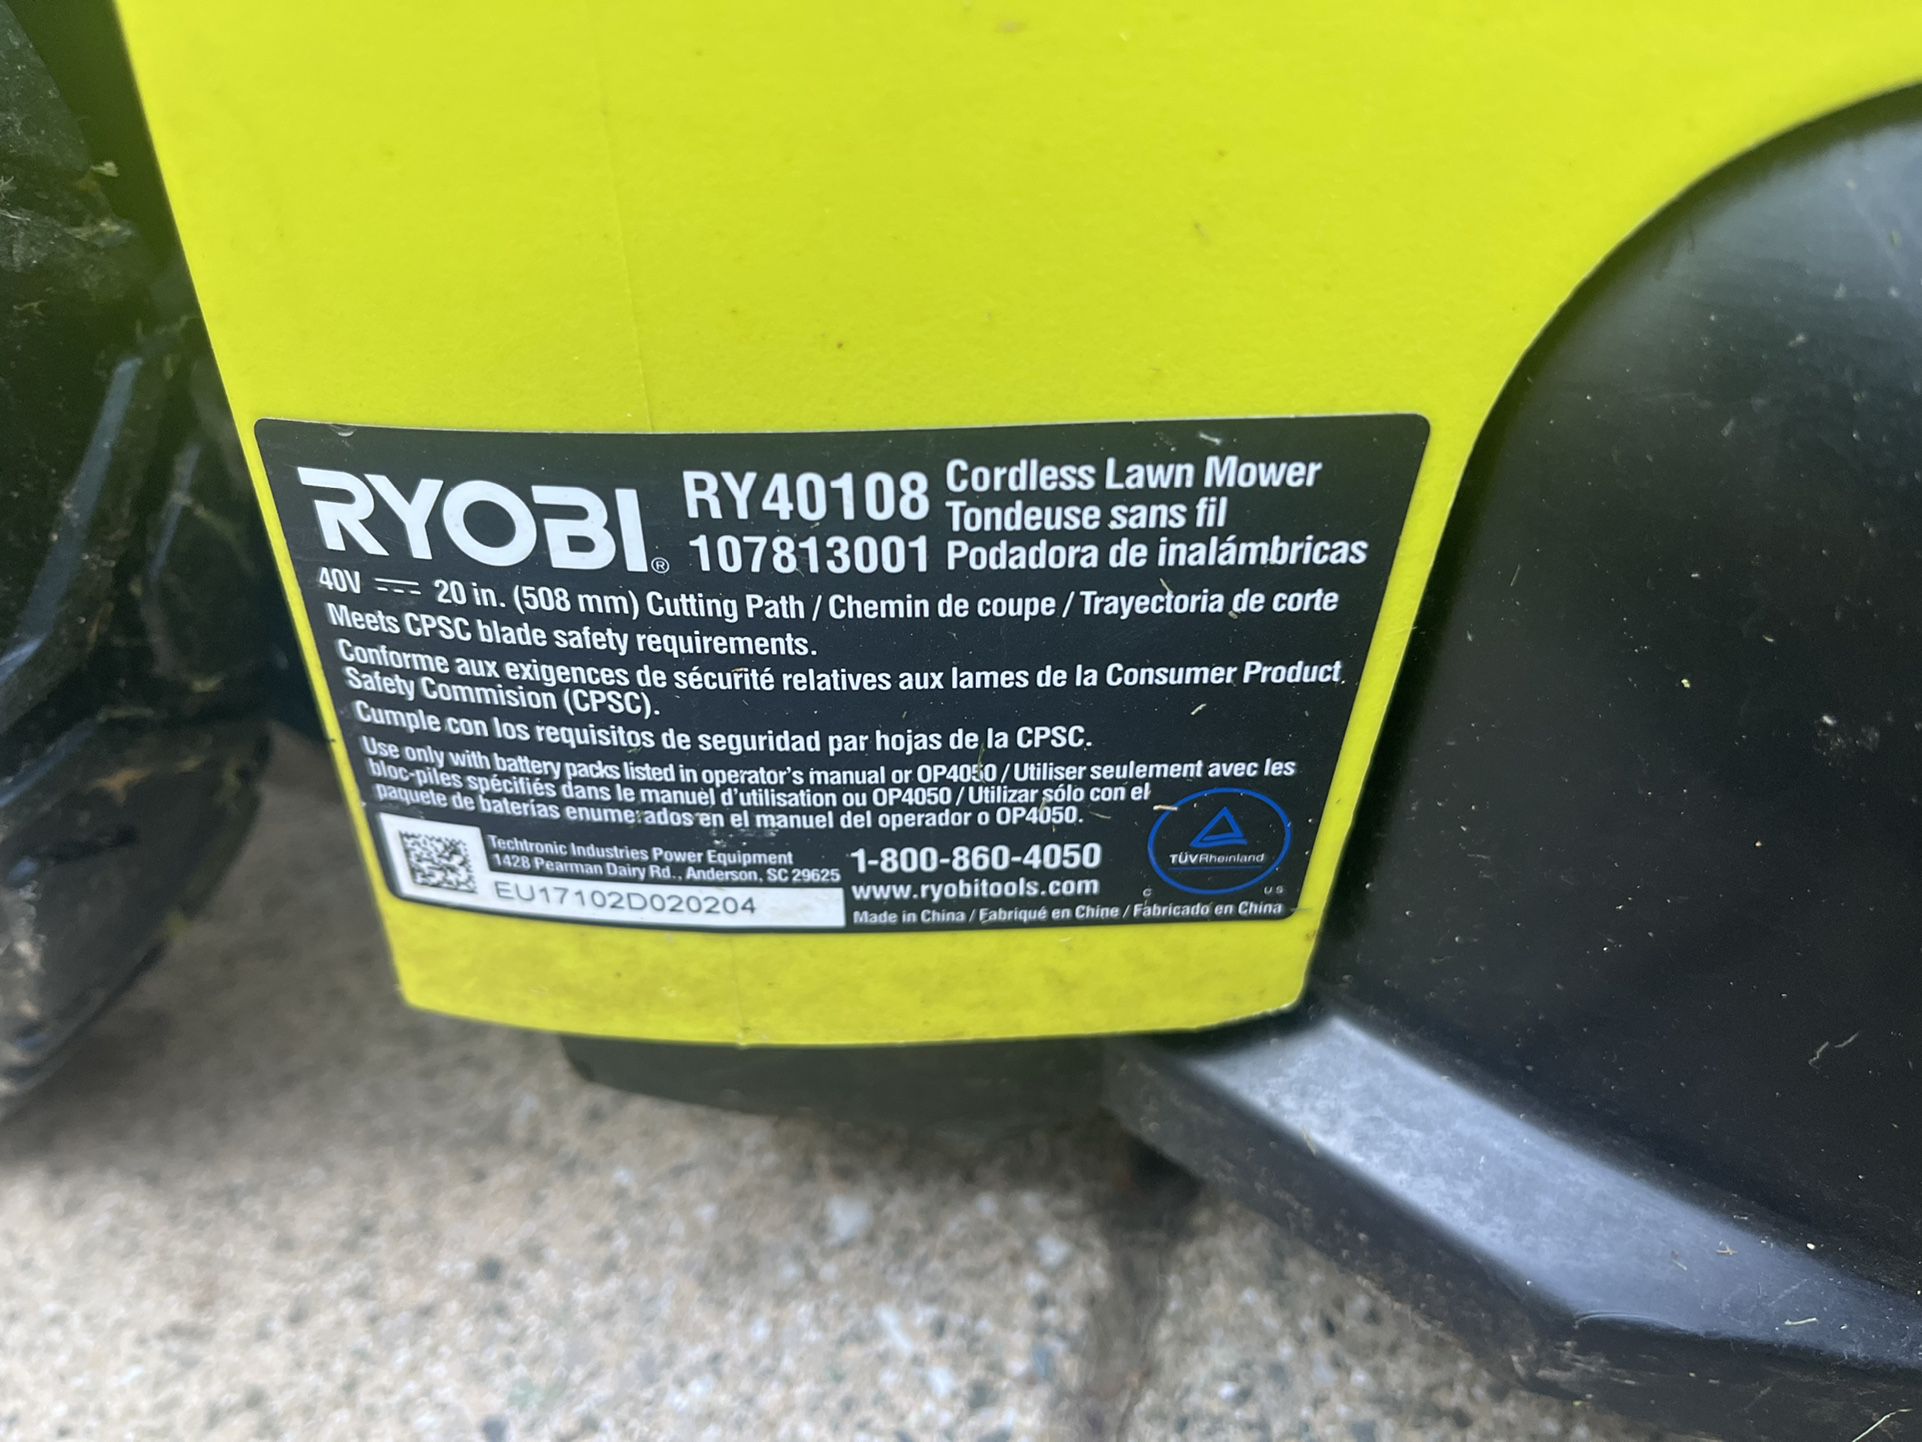 Where Is The Serial Number On Ryobi Tools